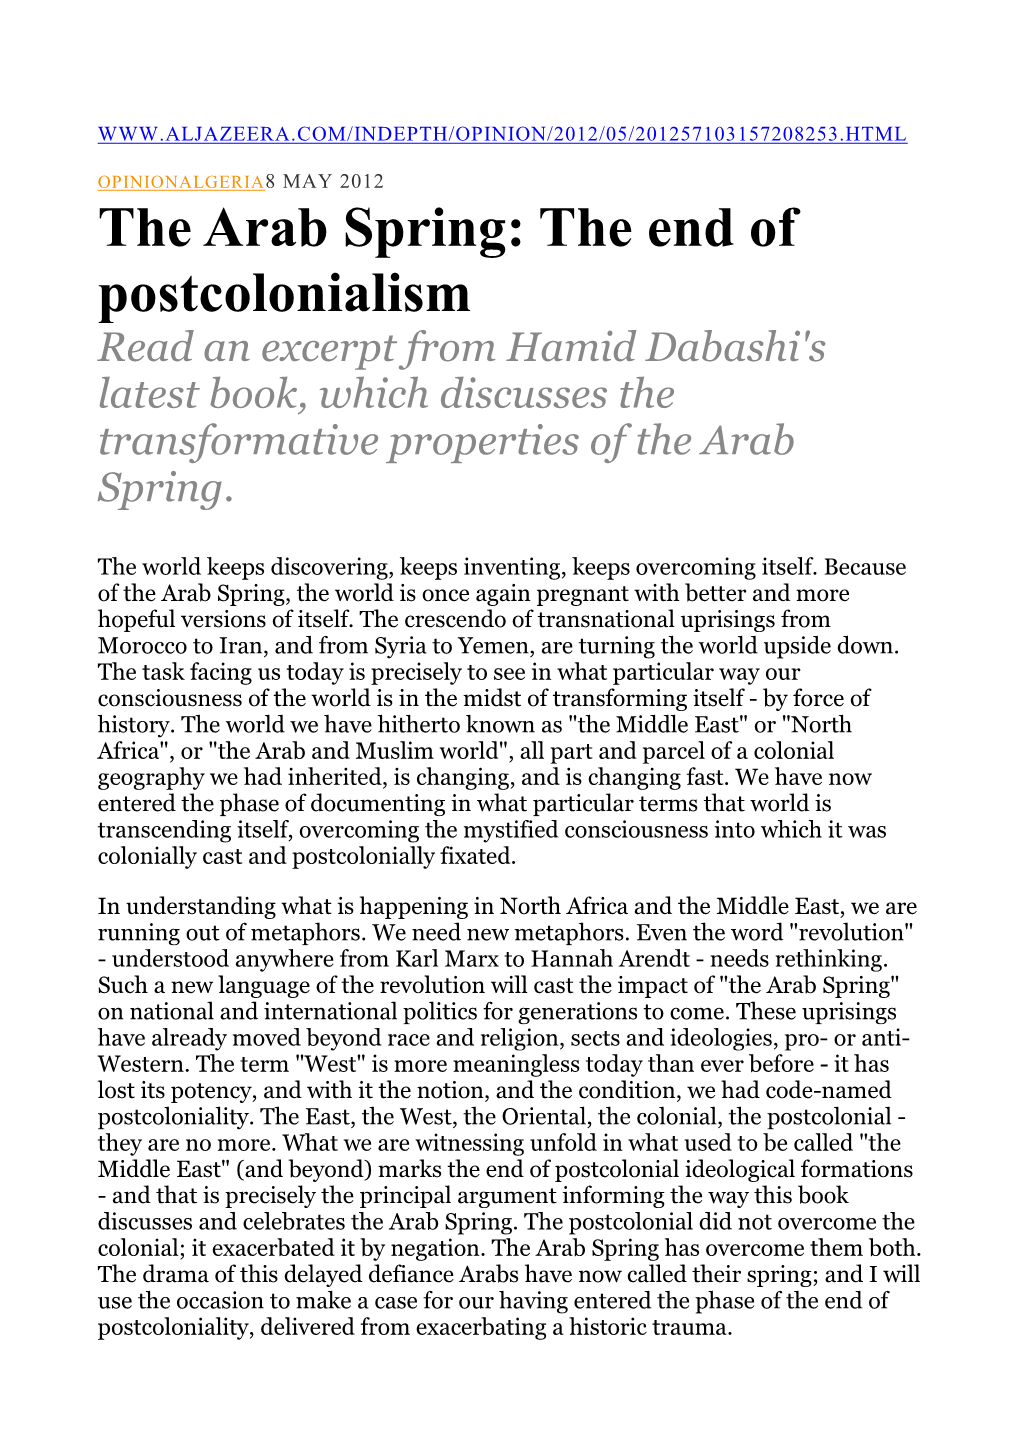 The Arab Spring: the End of Postcolonialism Read an Excerpt from Hamid Dabashi's Latest Book, Which Discusses the Transformative Properties of the Arab Spring